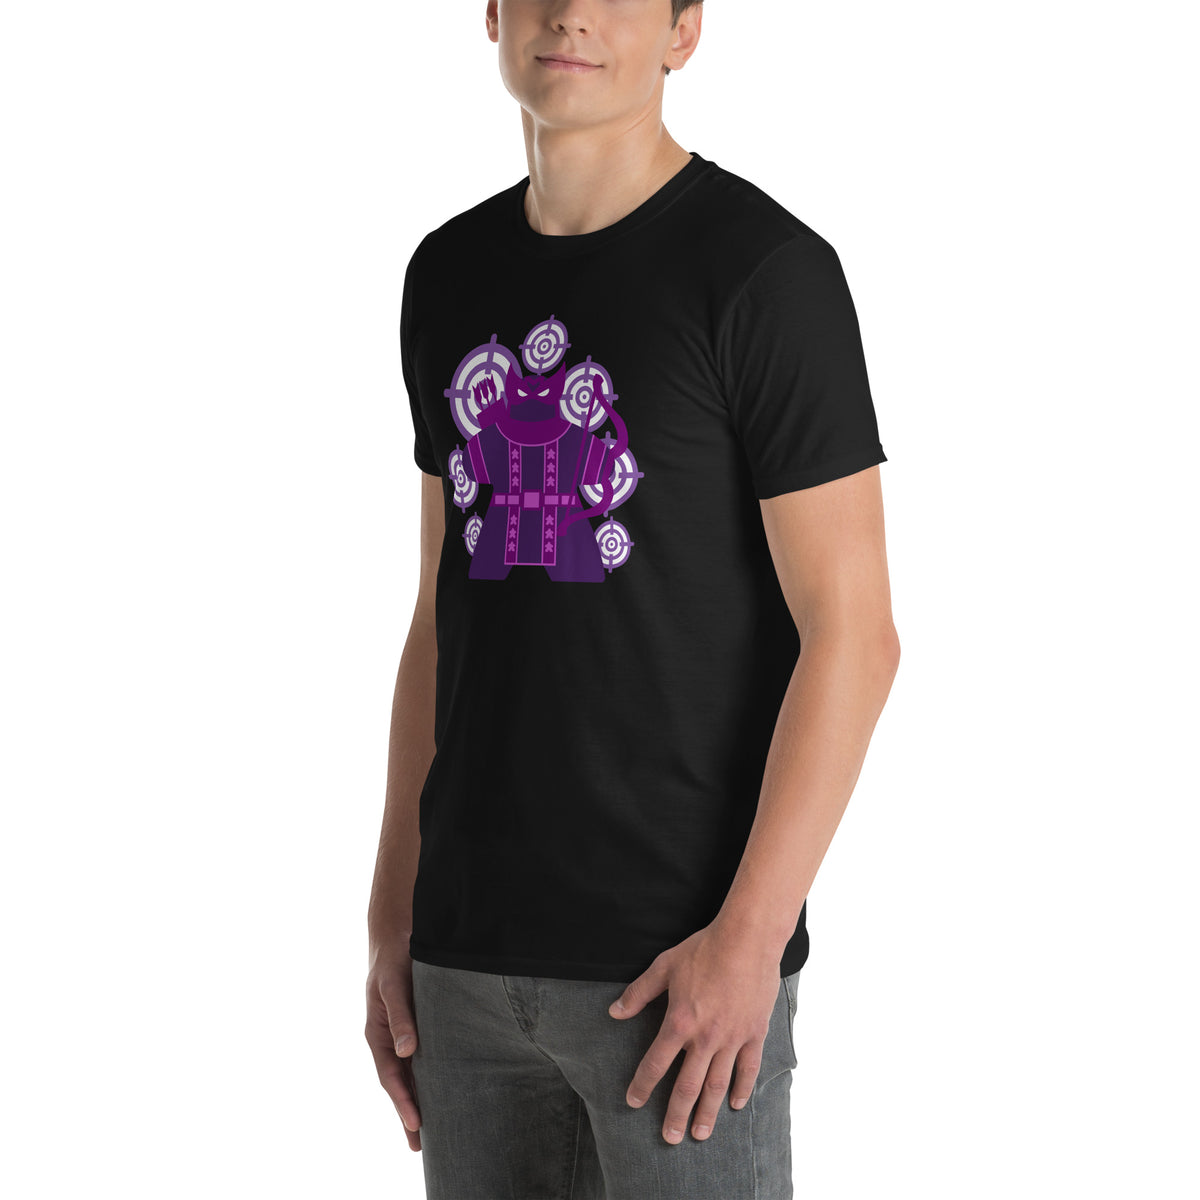 Meeple Archer Board Game T-Shirt